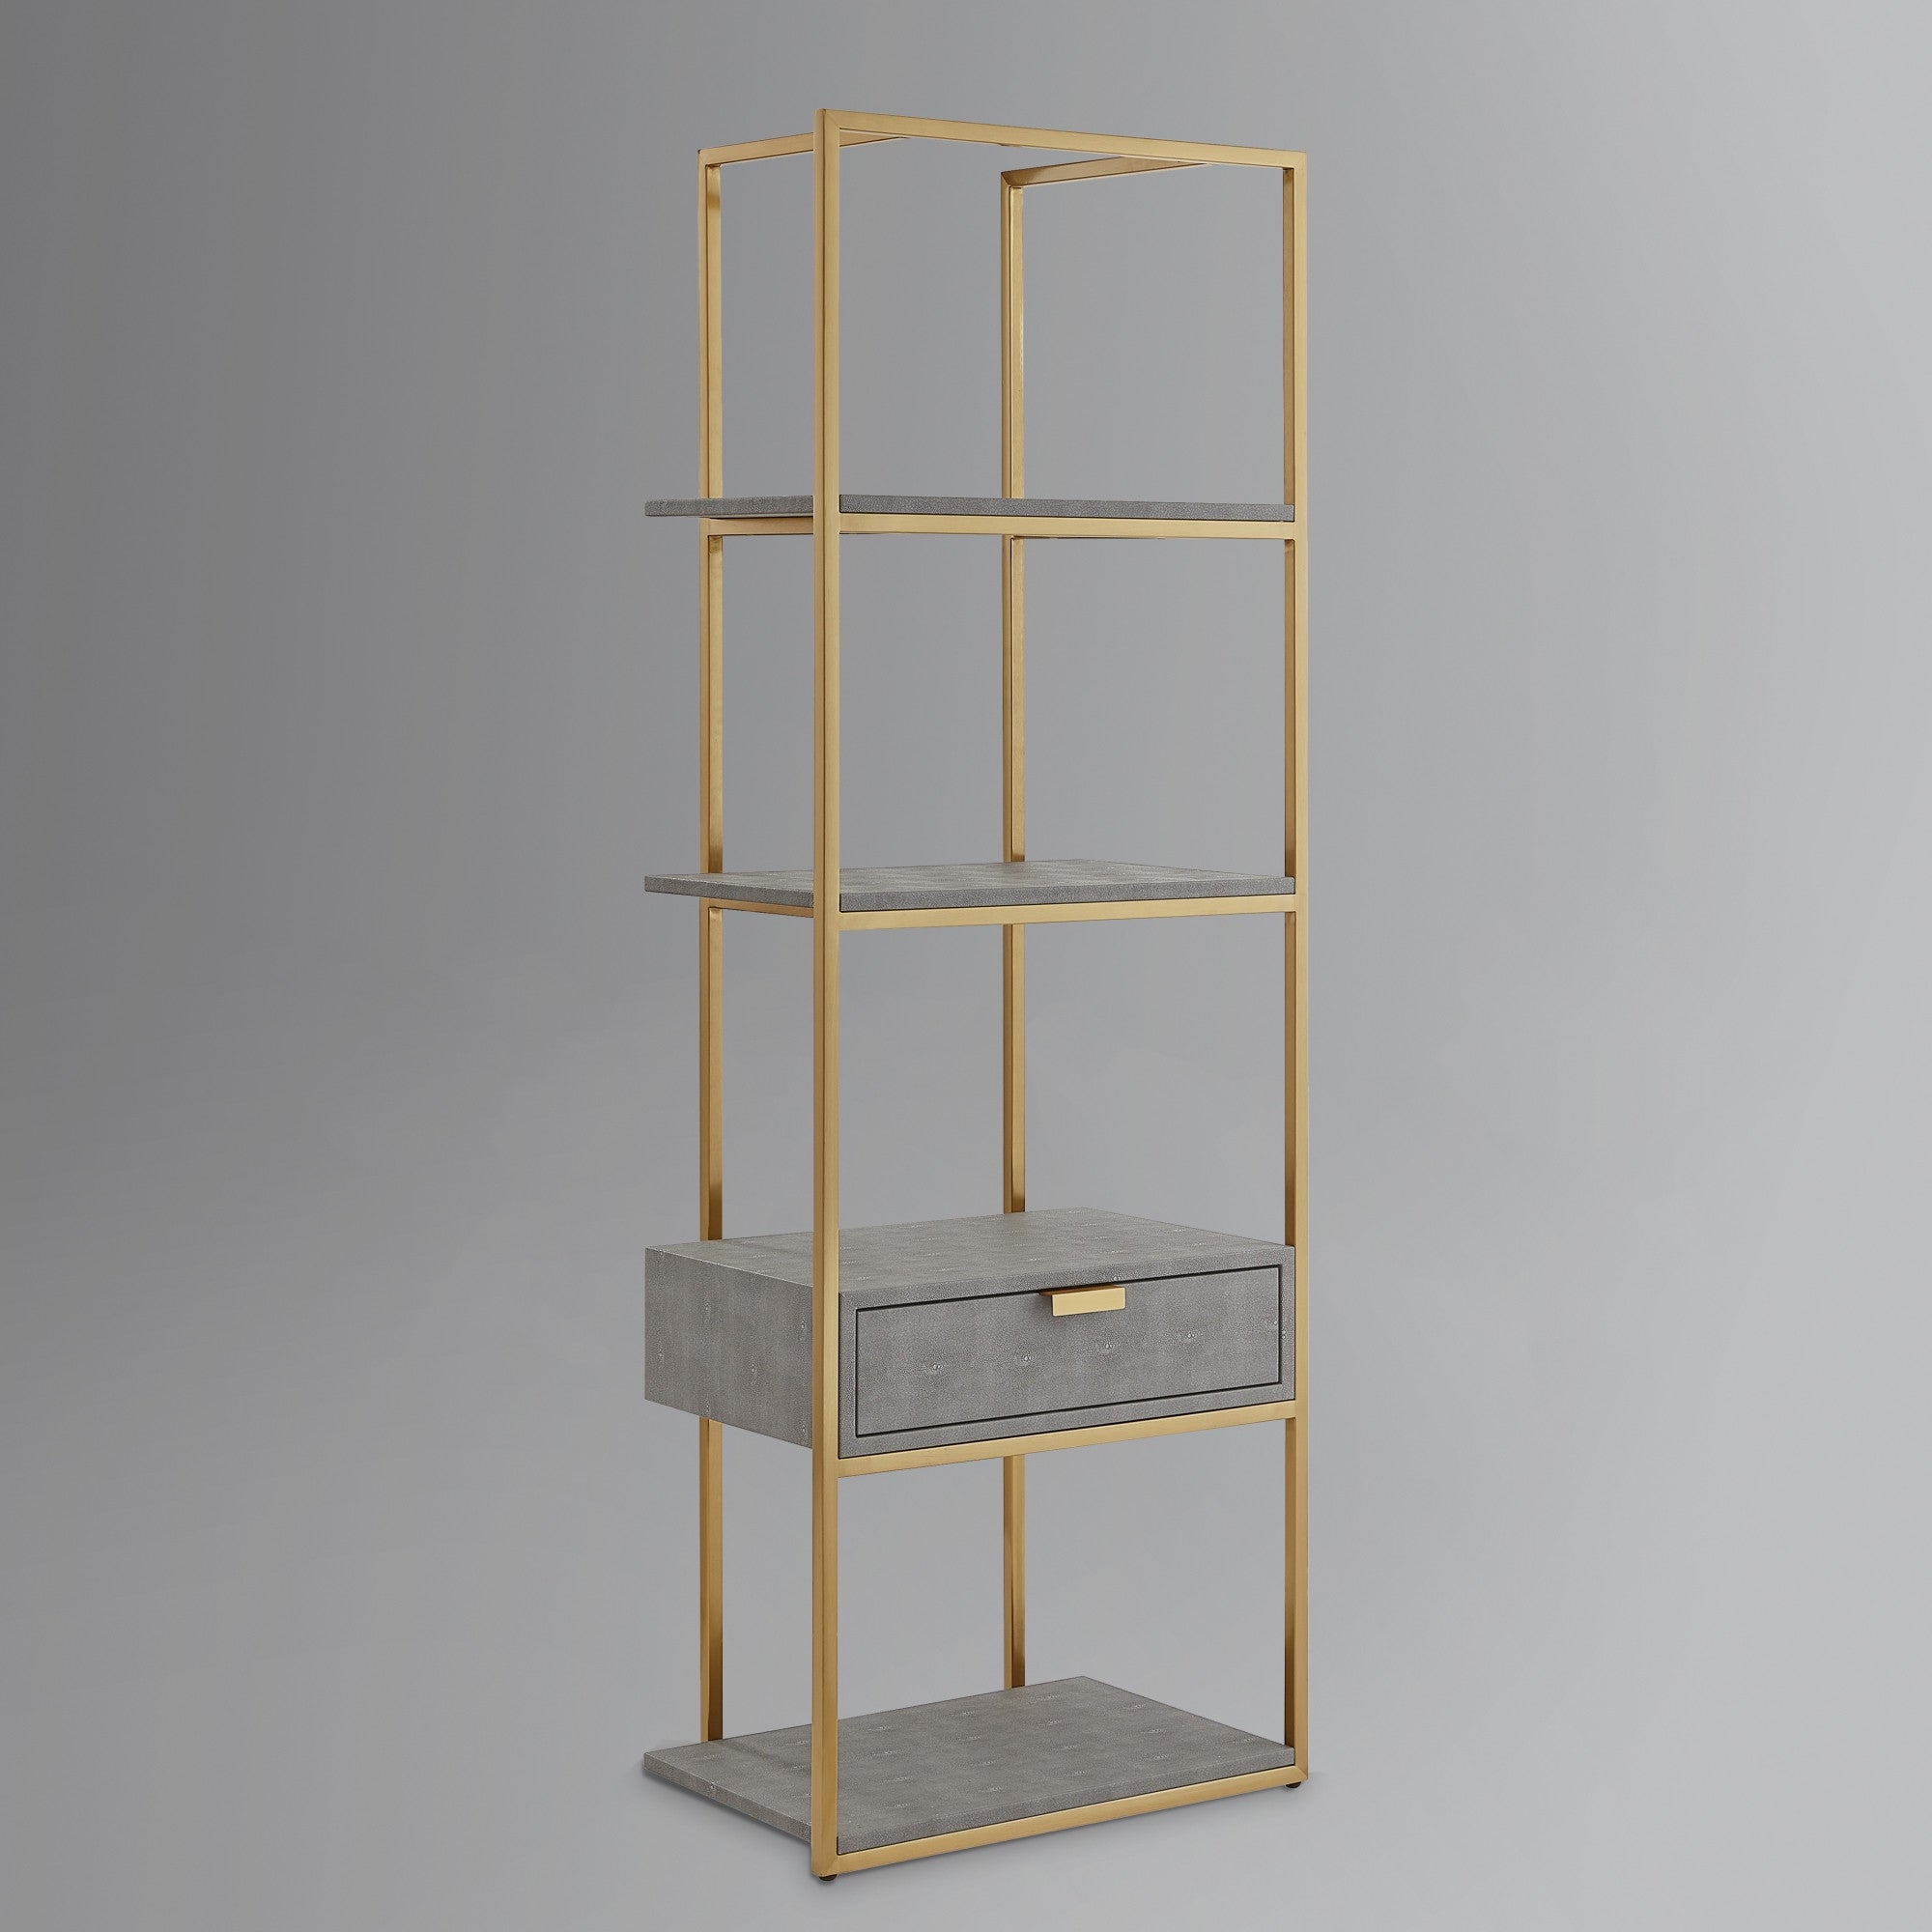 68" Gray Stainless Steel Four Tier Etagere Bookcase with a drawer